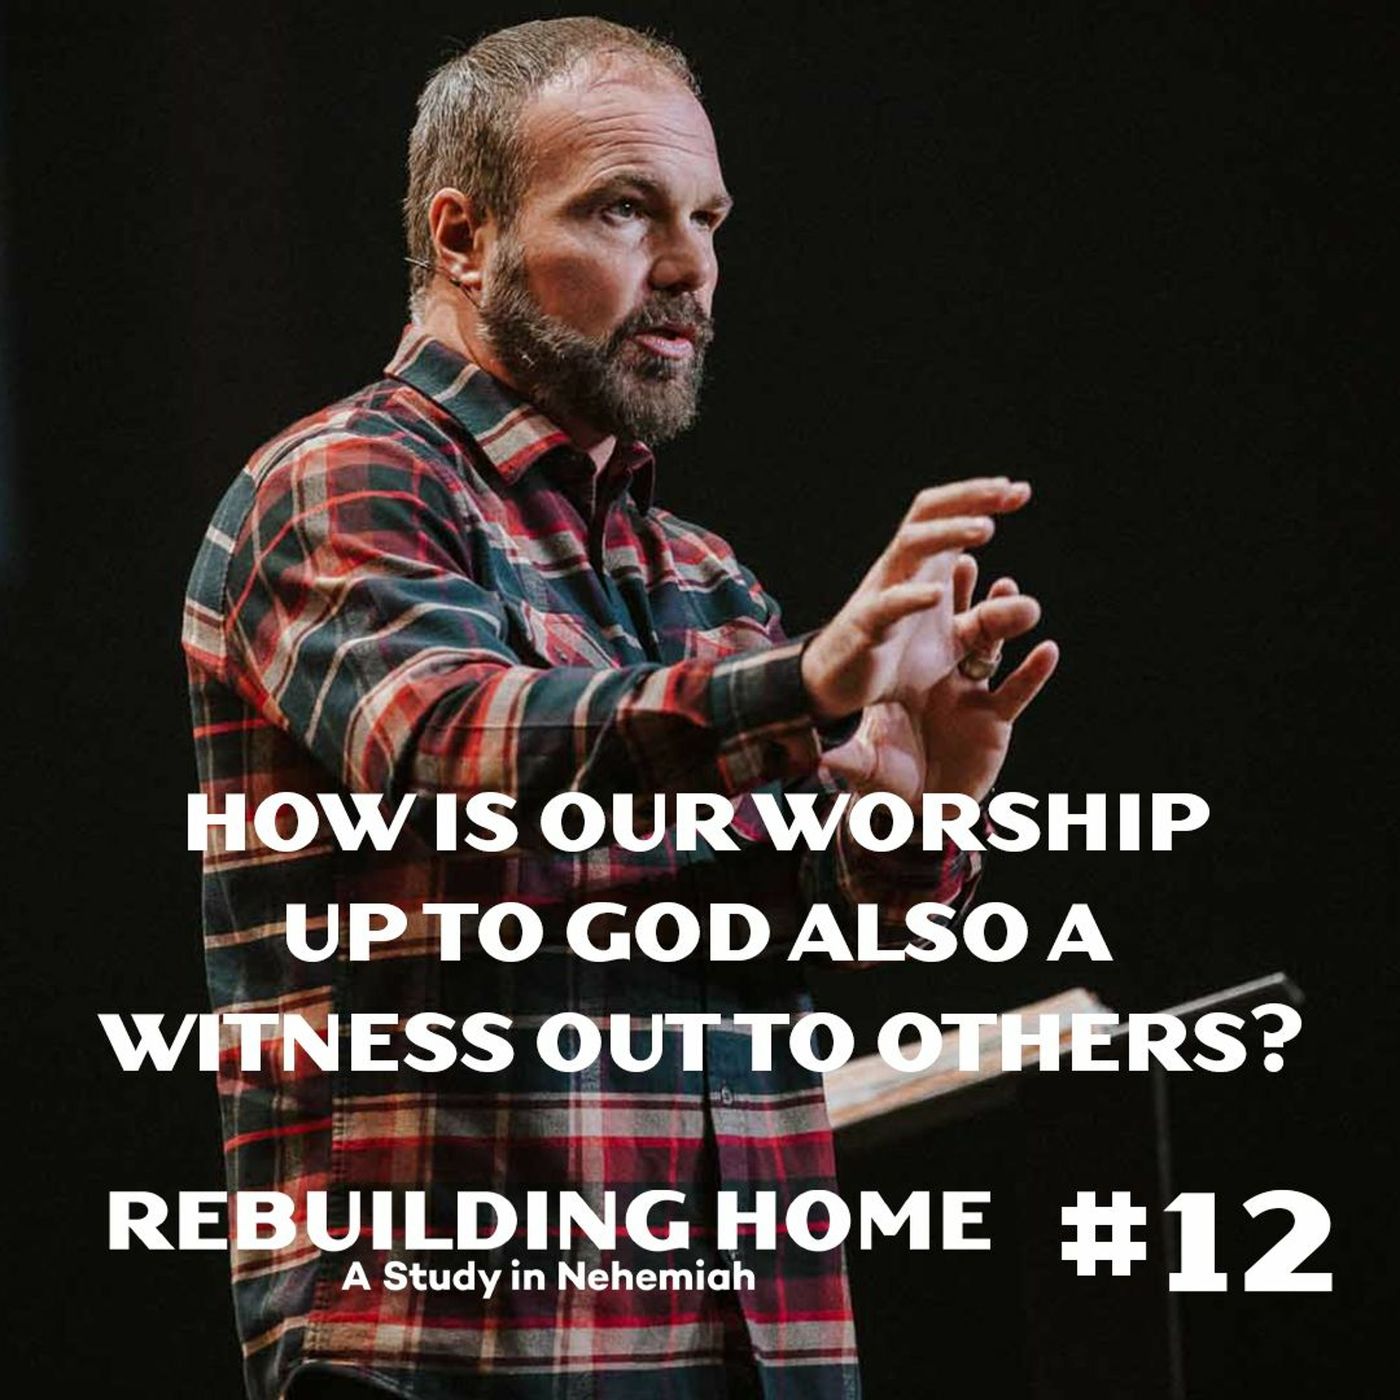 Nehemiah #12 - How Is Our Worship Up To God Also A Witness Out To Others?